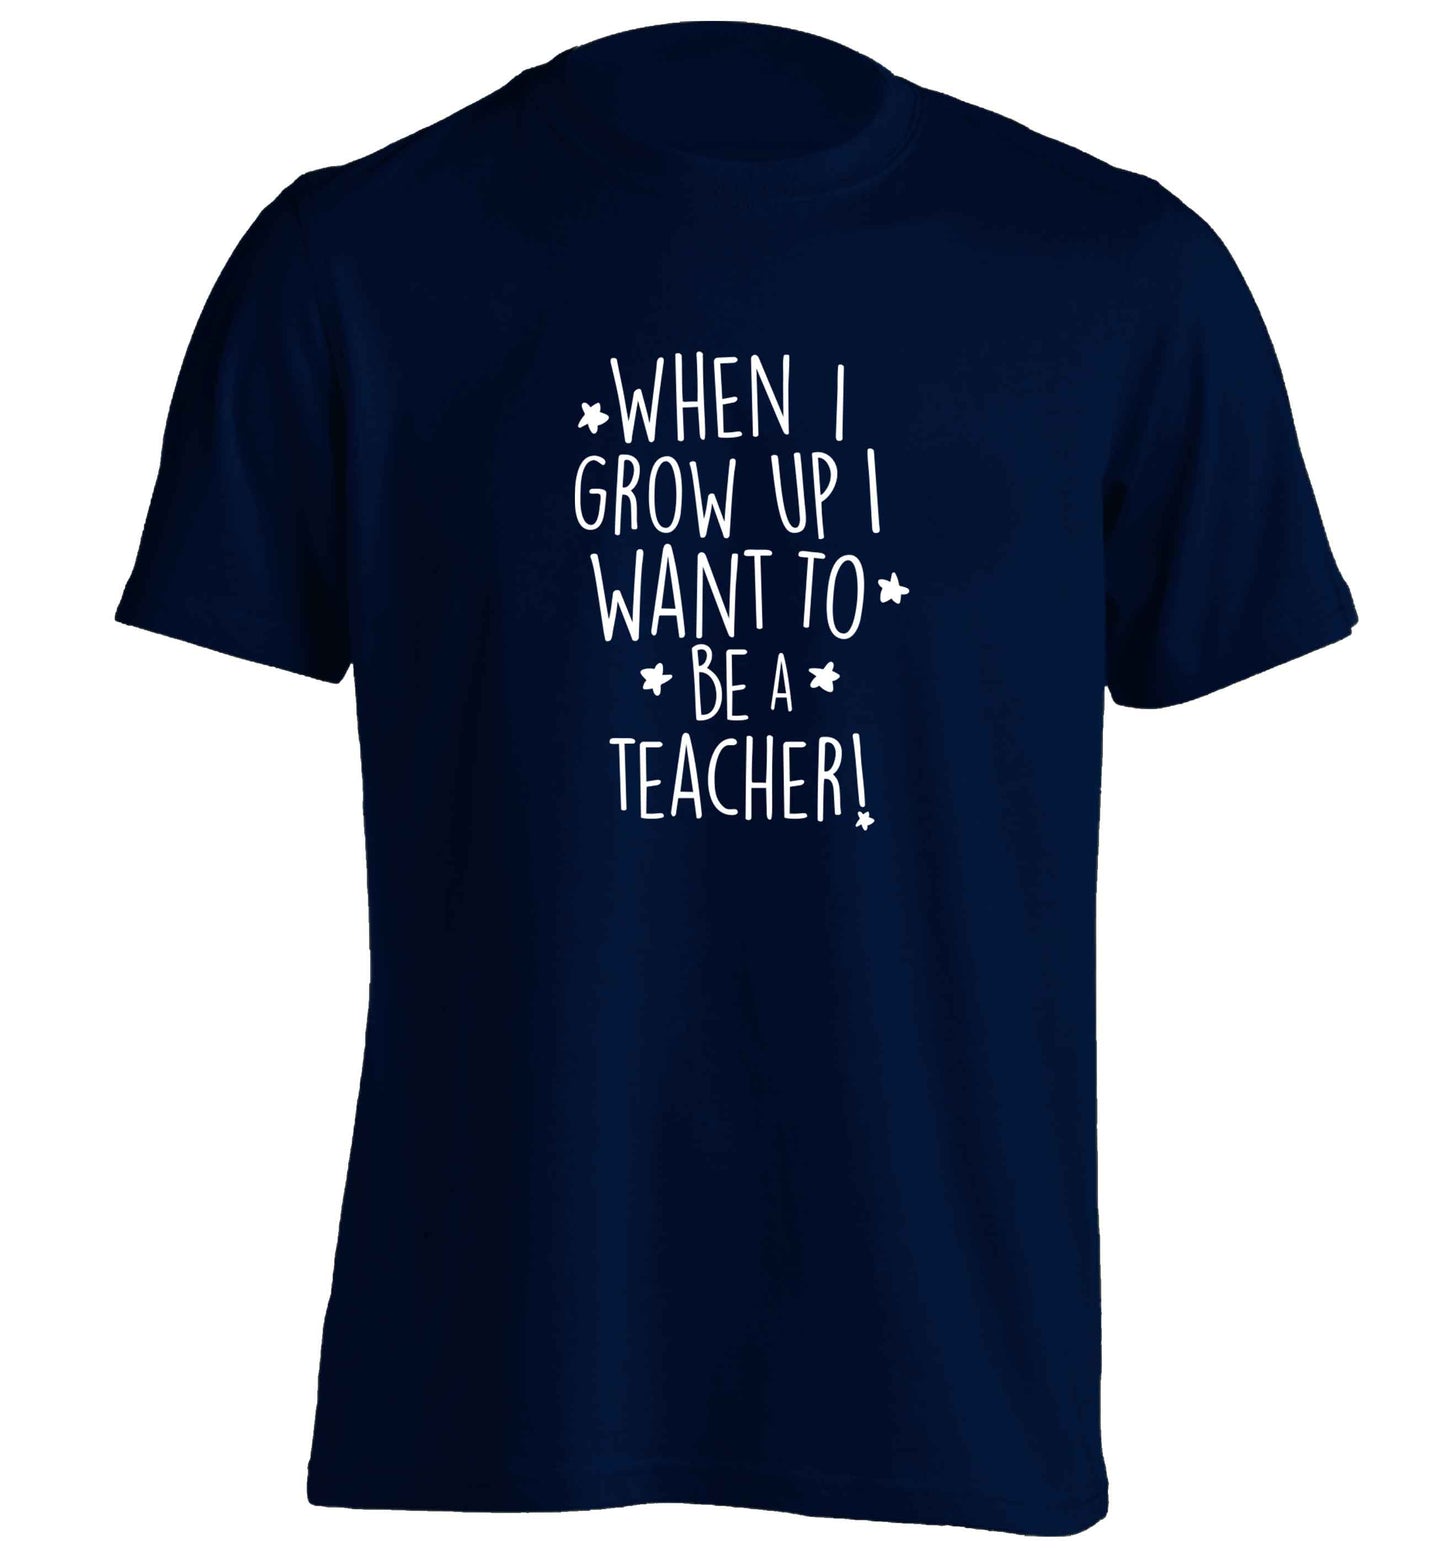 When I grow up I want to be a teacher adults unisex navy Tshirt 2XL